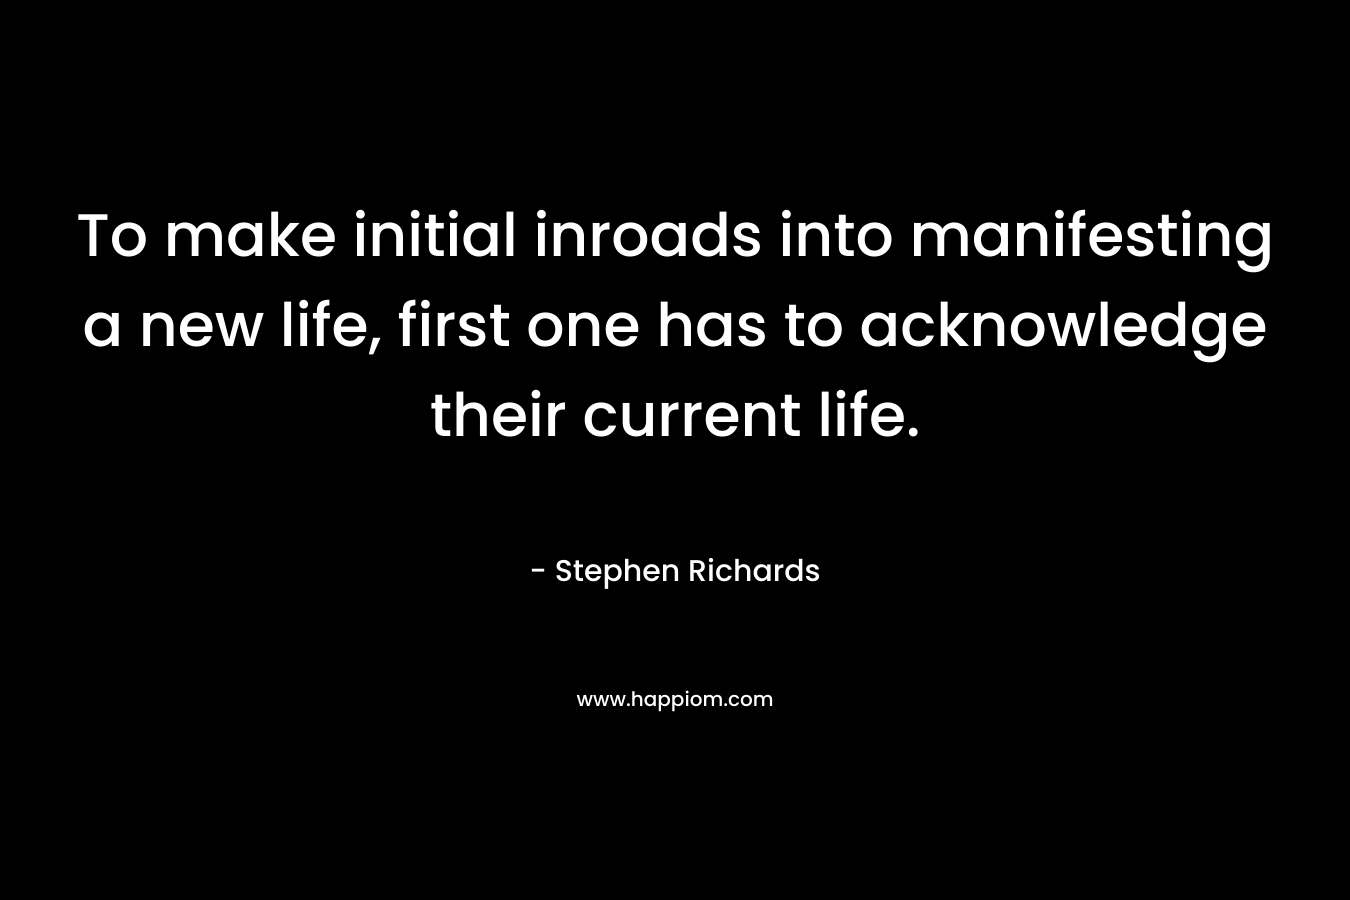 To make initial inroads into manifesting a new life, first one has to acknowledge their current life. – Stephen Richards